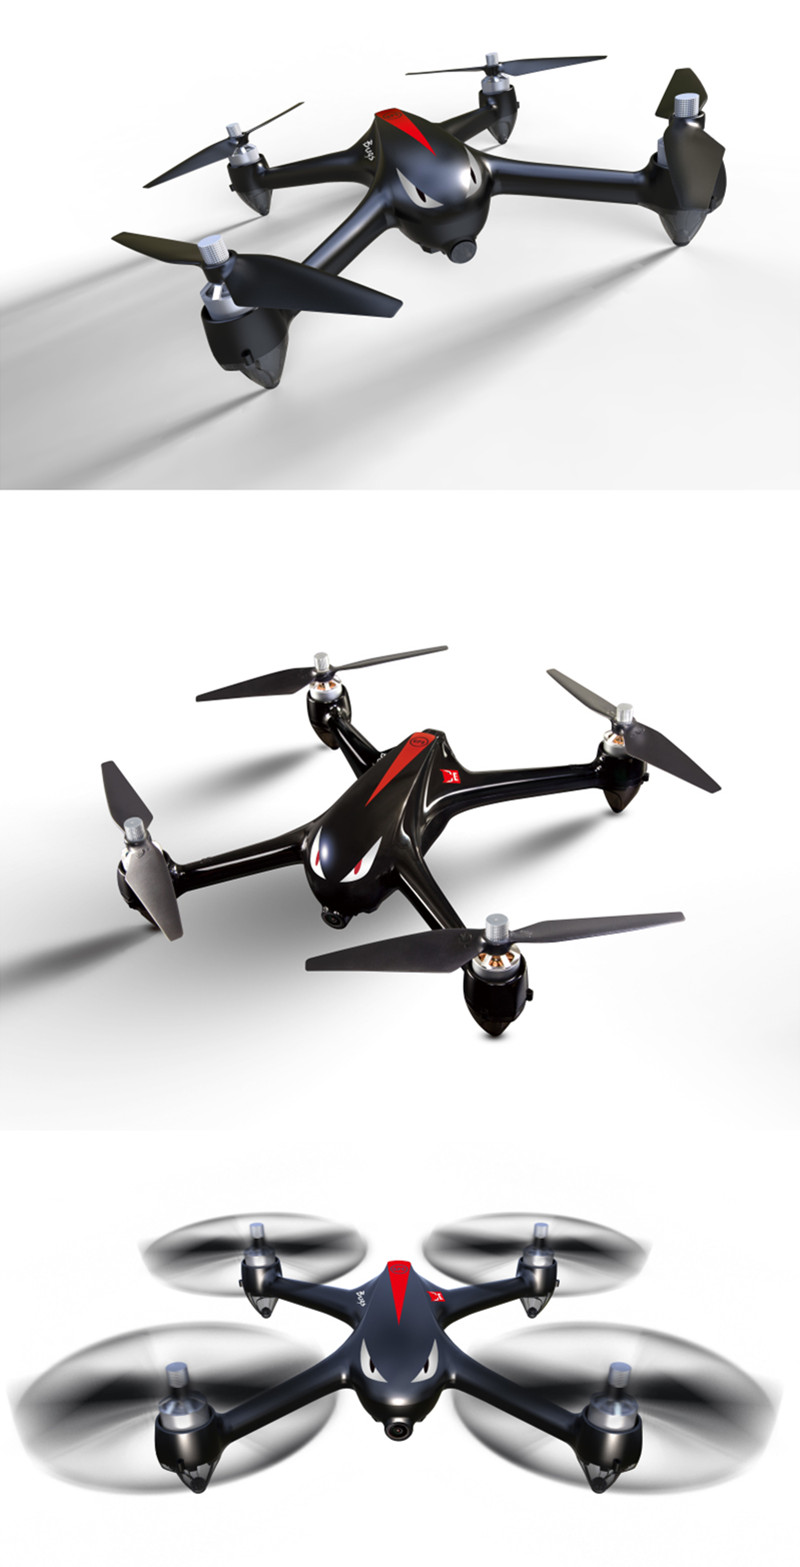 MJX B2W Bugs 2W Monster Brushless 5G WiFi FPV With 1080P HD Camera GPS RC Quadcopter RTF - Photo: 8